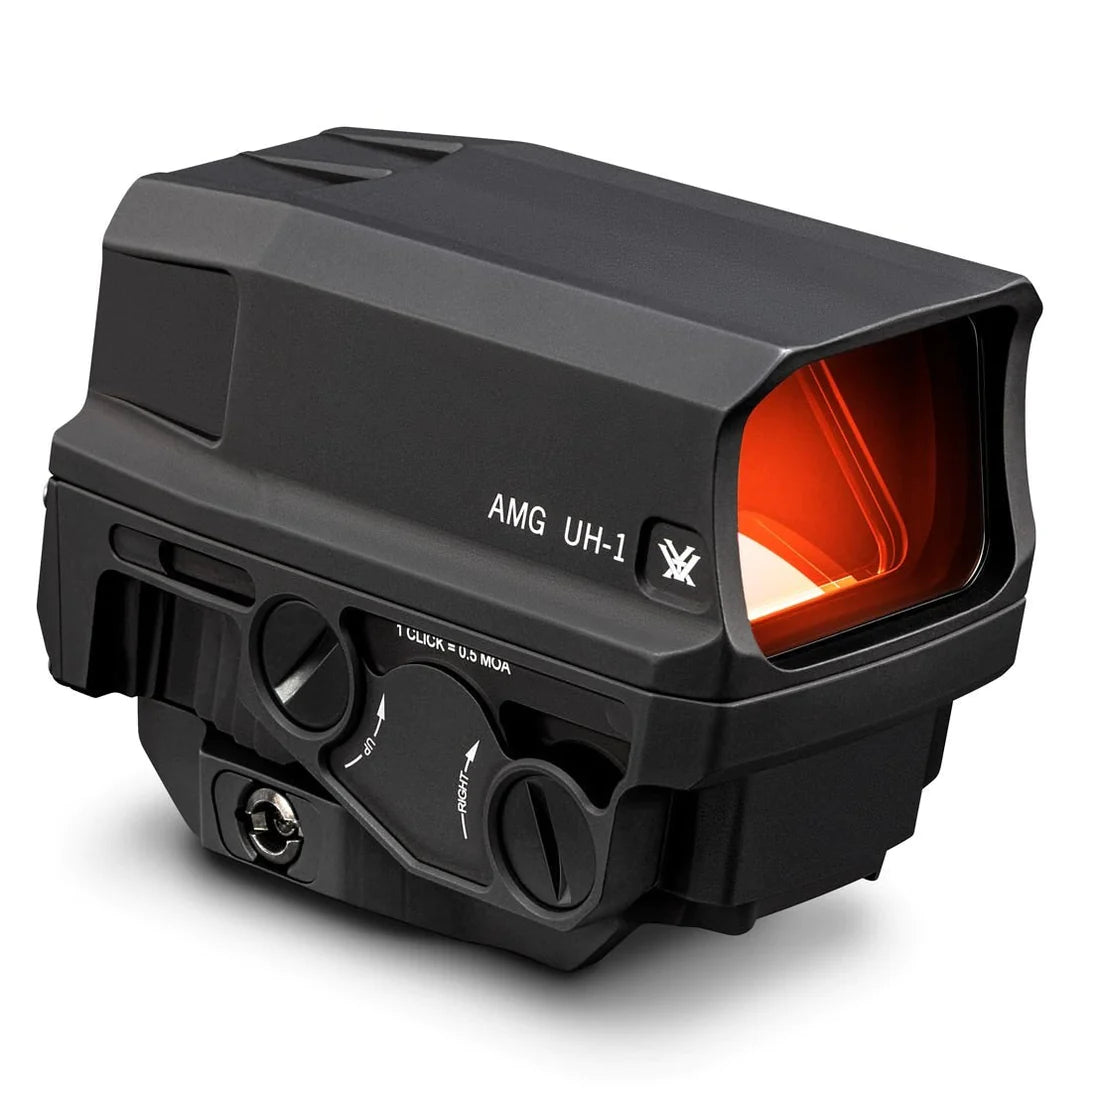 AMG UH-1 Gen II Holographic Sight